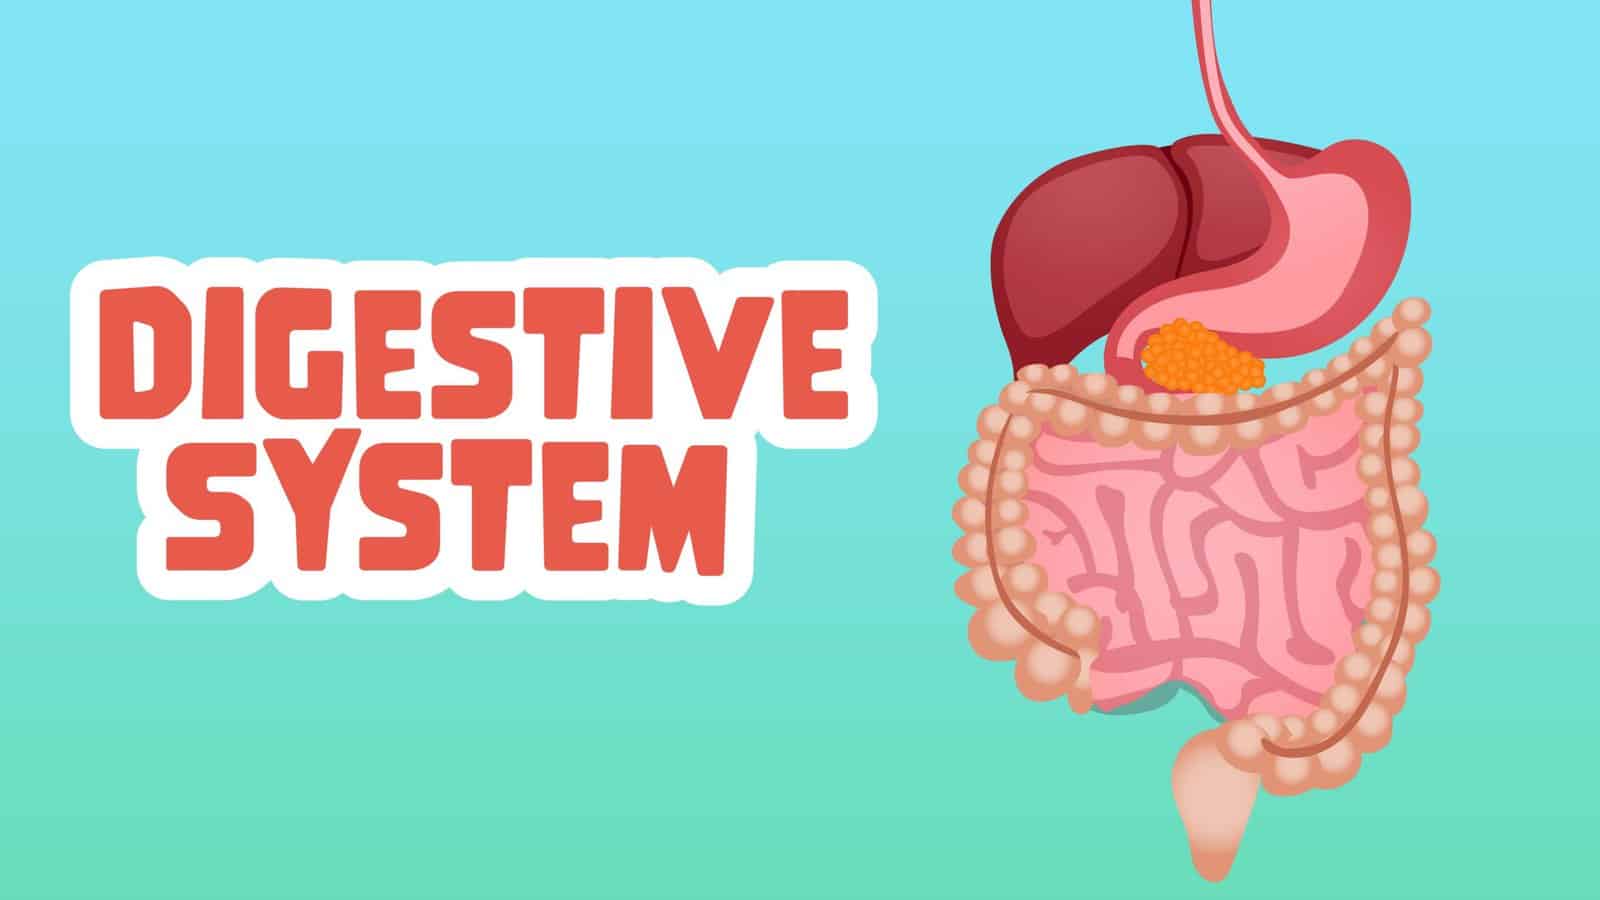 Digestive System Facts for Kids – 5 Delightful Facts about The Digestive System